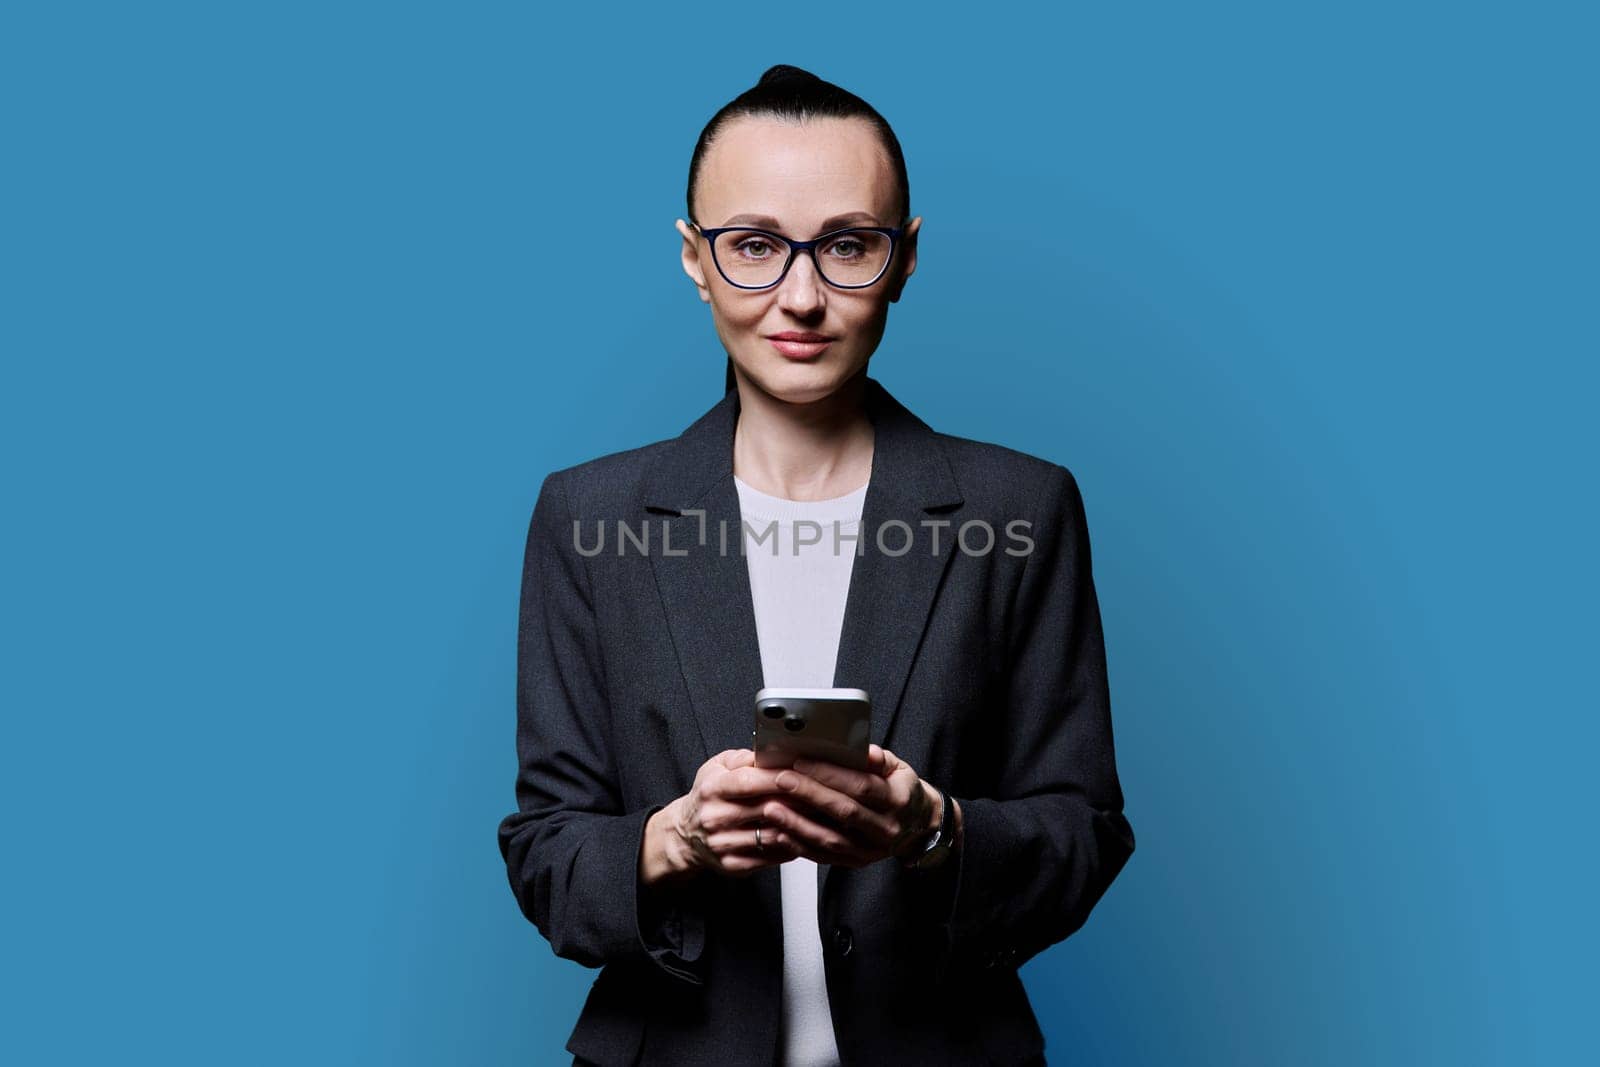 Adult smiling woman holding smartphone on blue background. 30s female looking at camera with phone in hands. Technologies mobile applications internet work business leisure communication